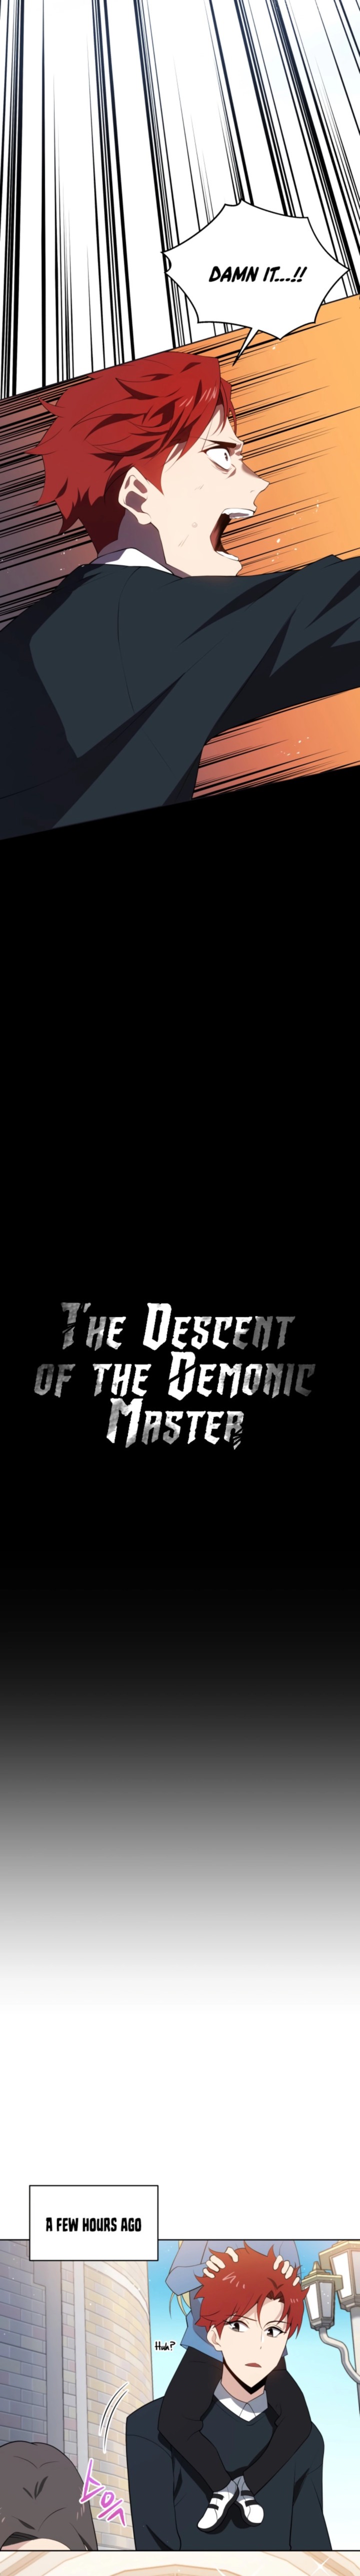 the_descent_of_the_demonic_master_101_4